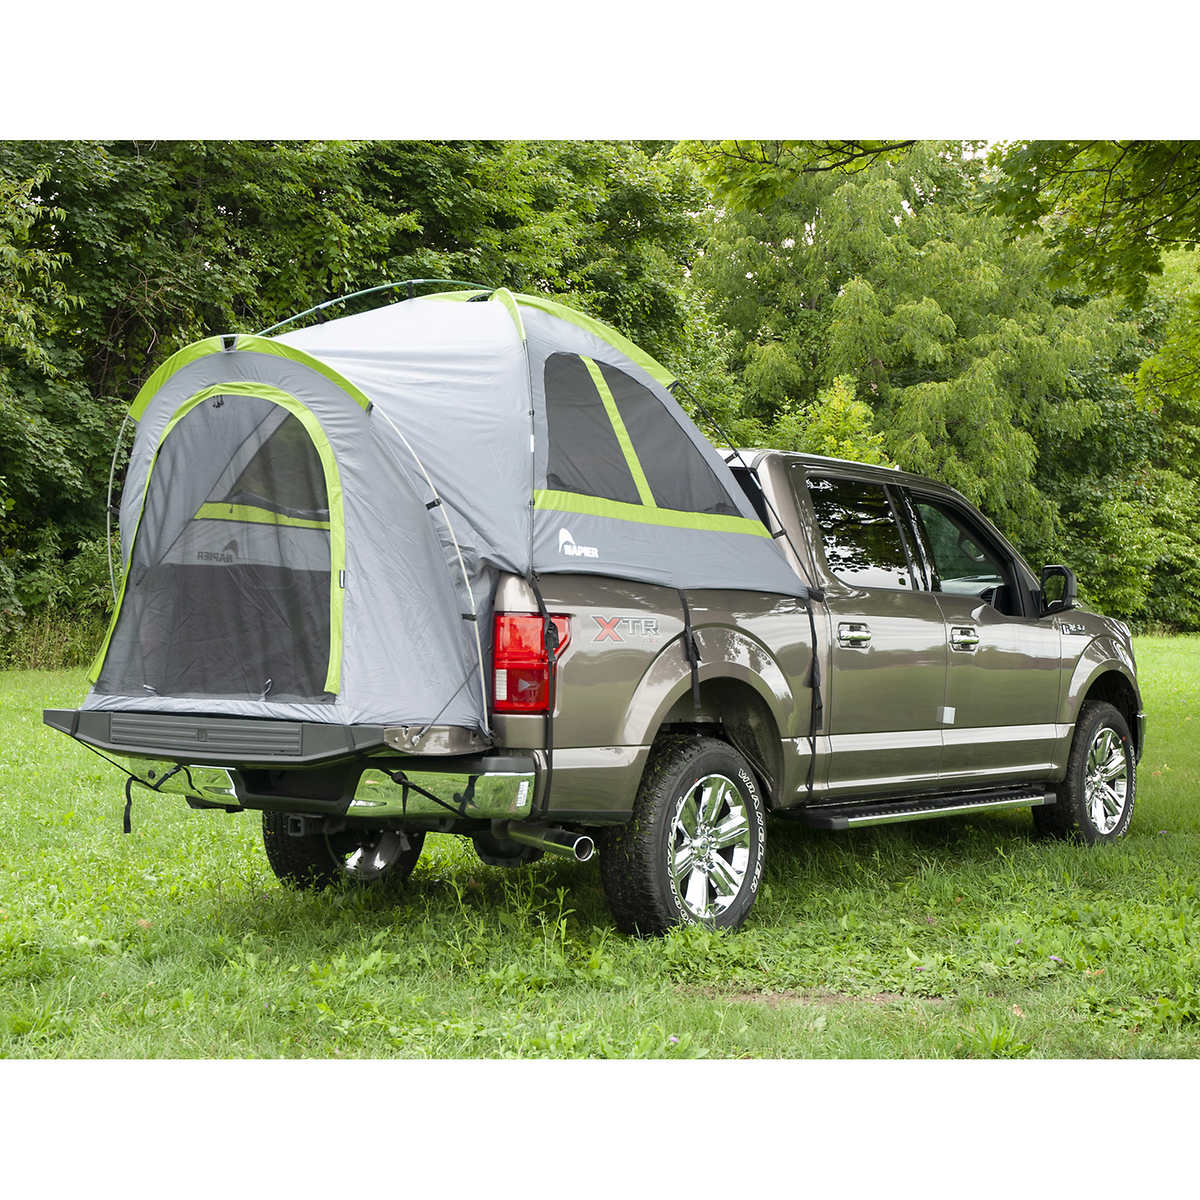 Lifetime Camping Tent Trailer. Sell at Costco for $2,800! Apparently you  can get one that carries a 4 wheeler on top